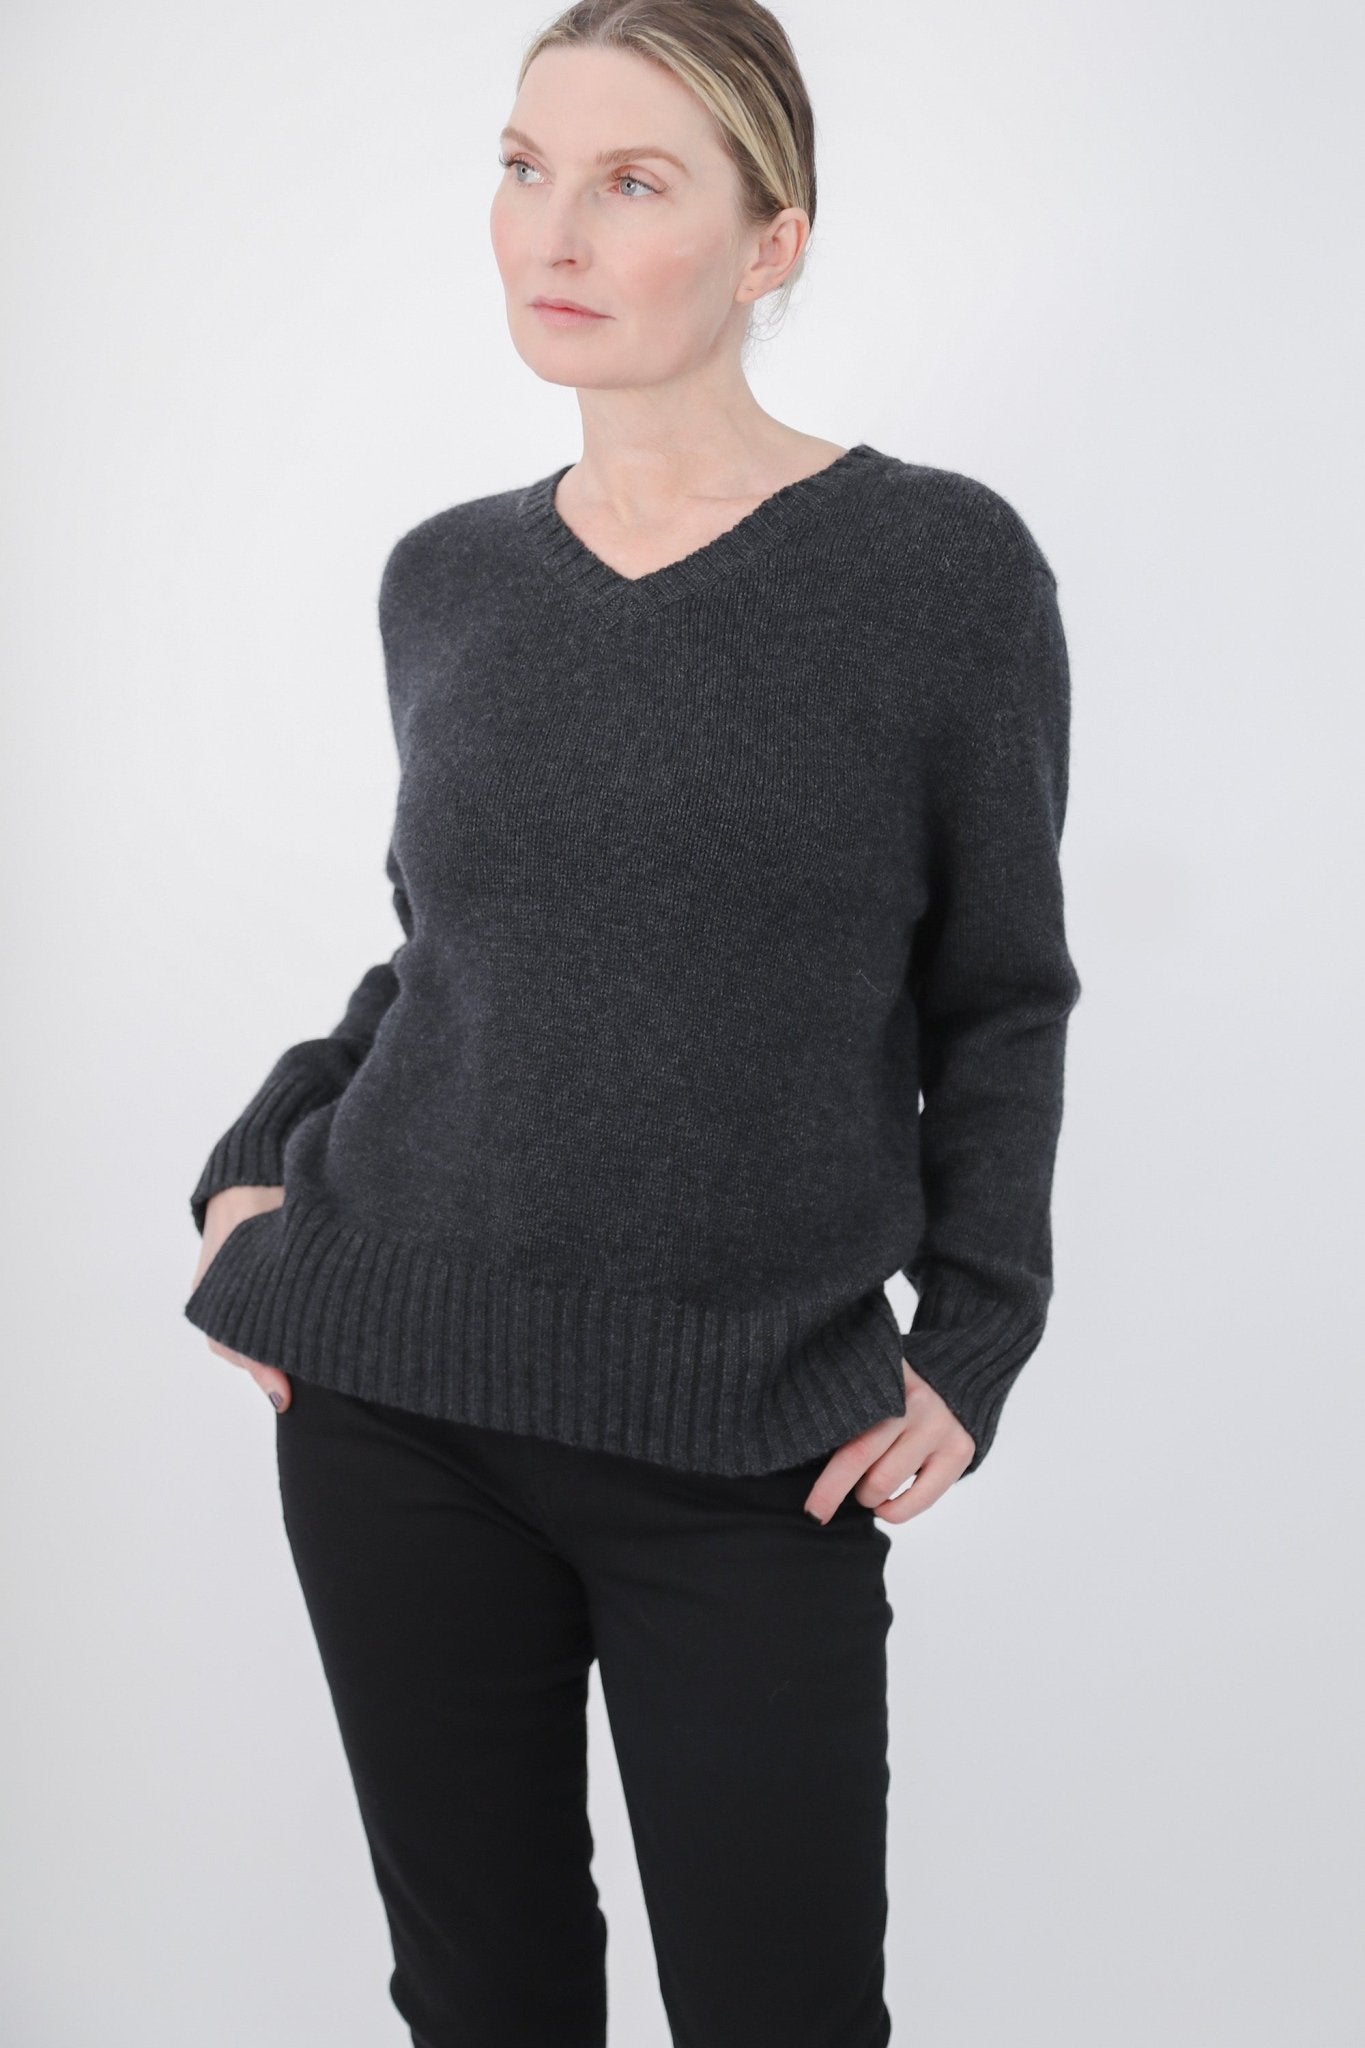 INVERNESS V NECK SWEATER IN CASHMERE MERINO 4 PLY KNIT - Jarbo